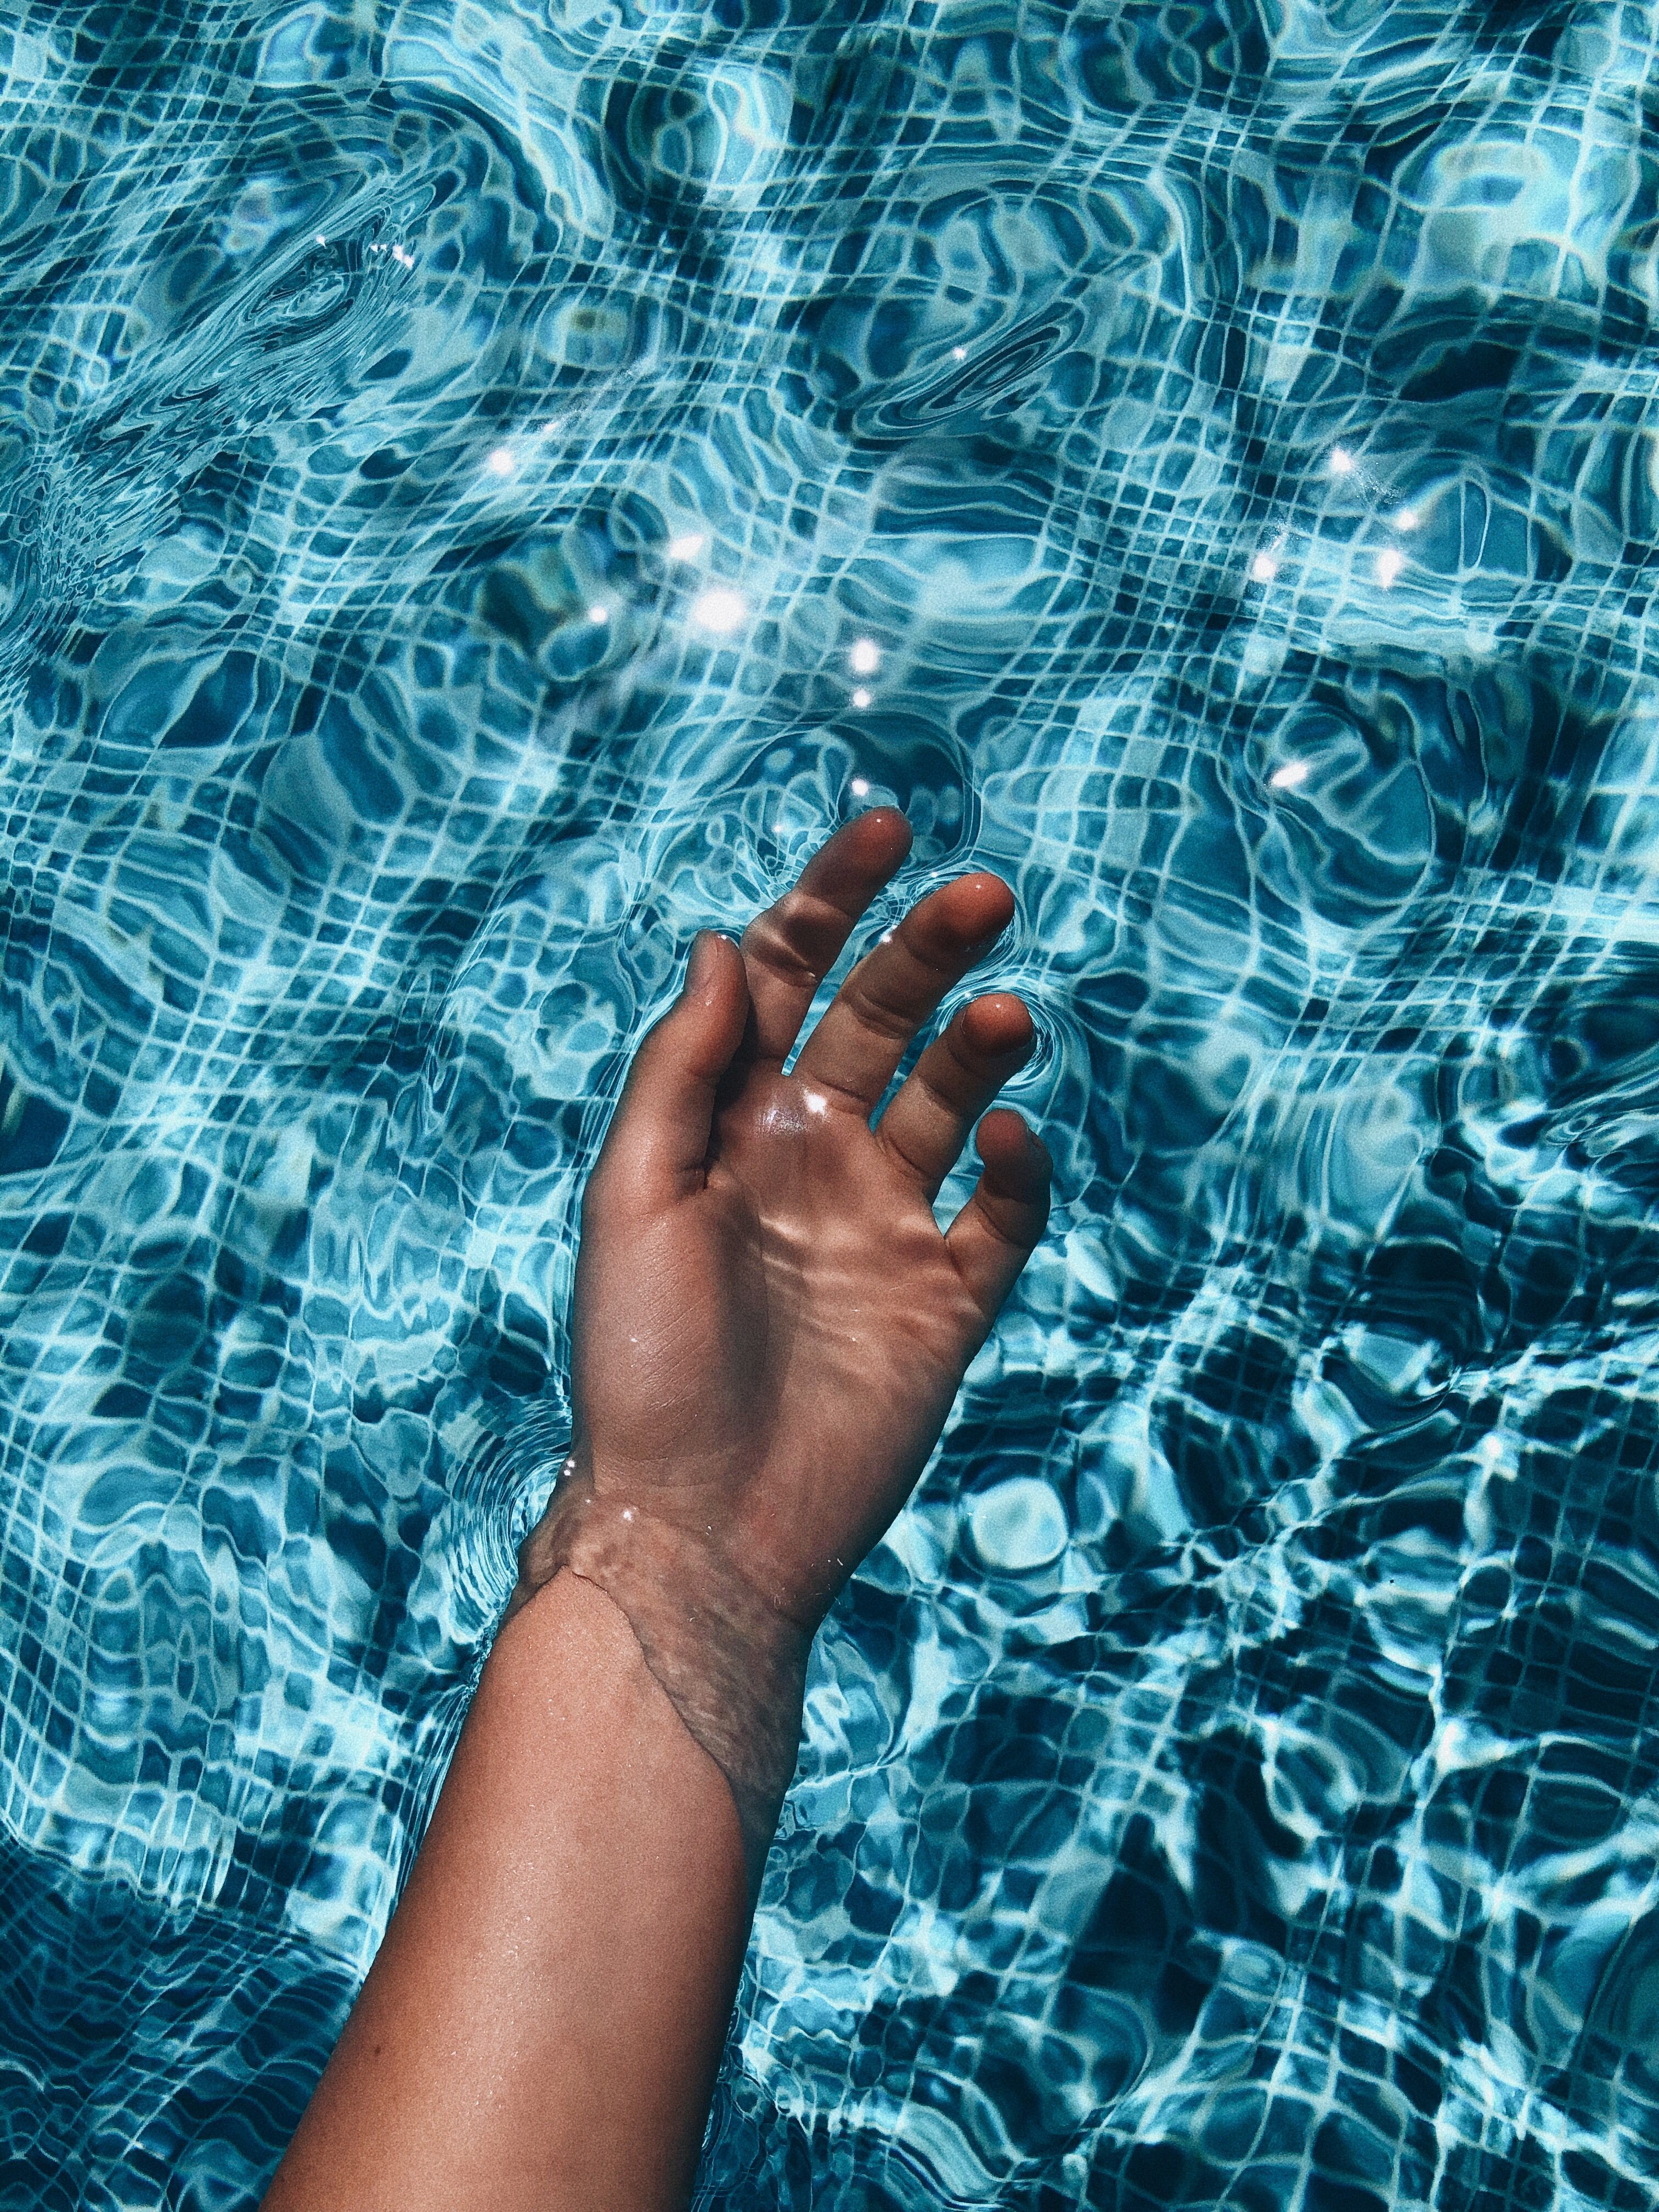 water / pool. Water aesthetic, Aesthetic picture, Vsco picture